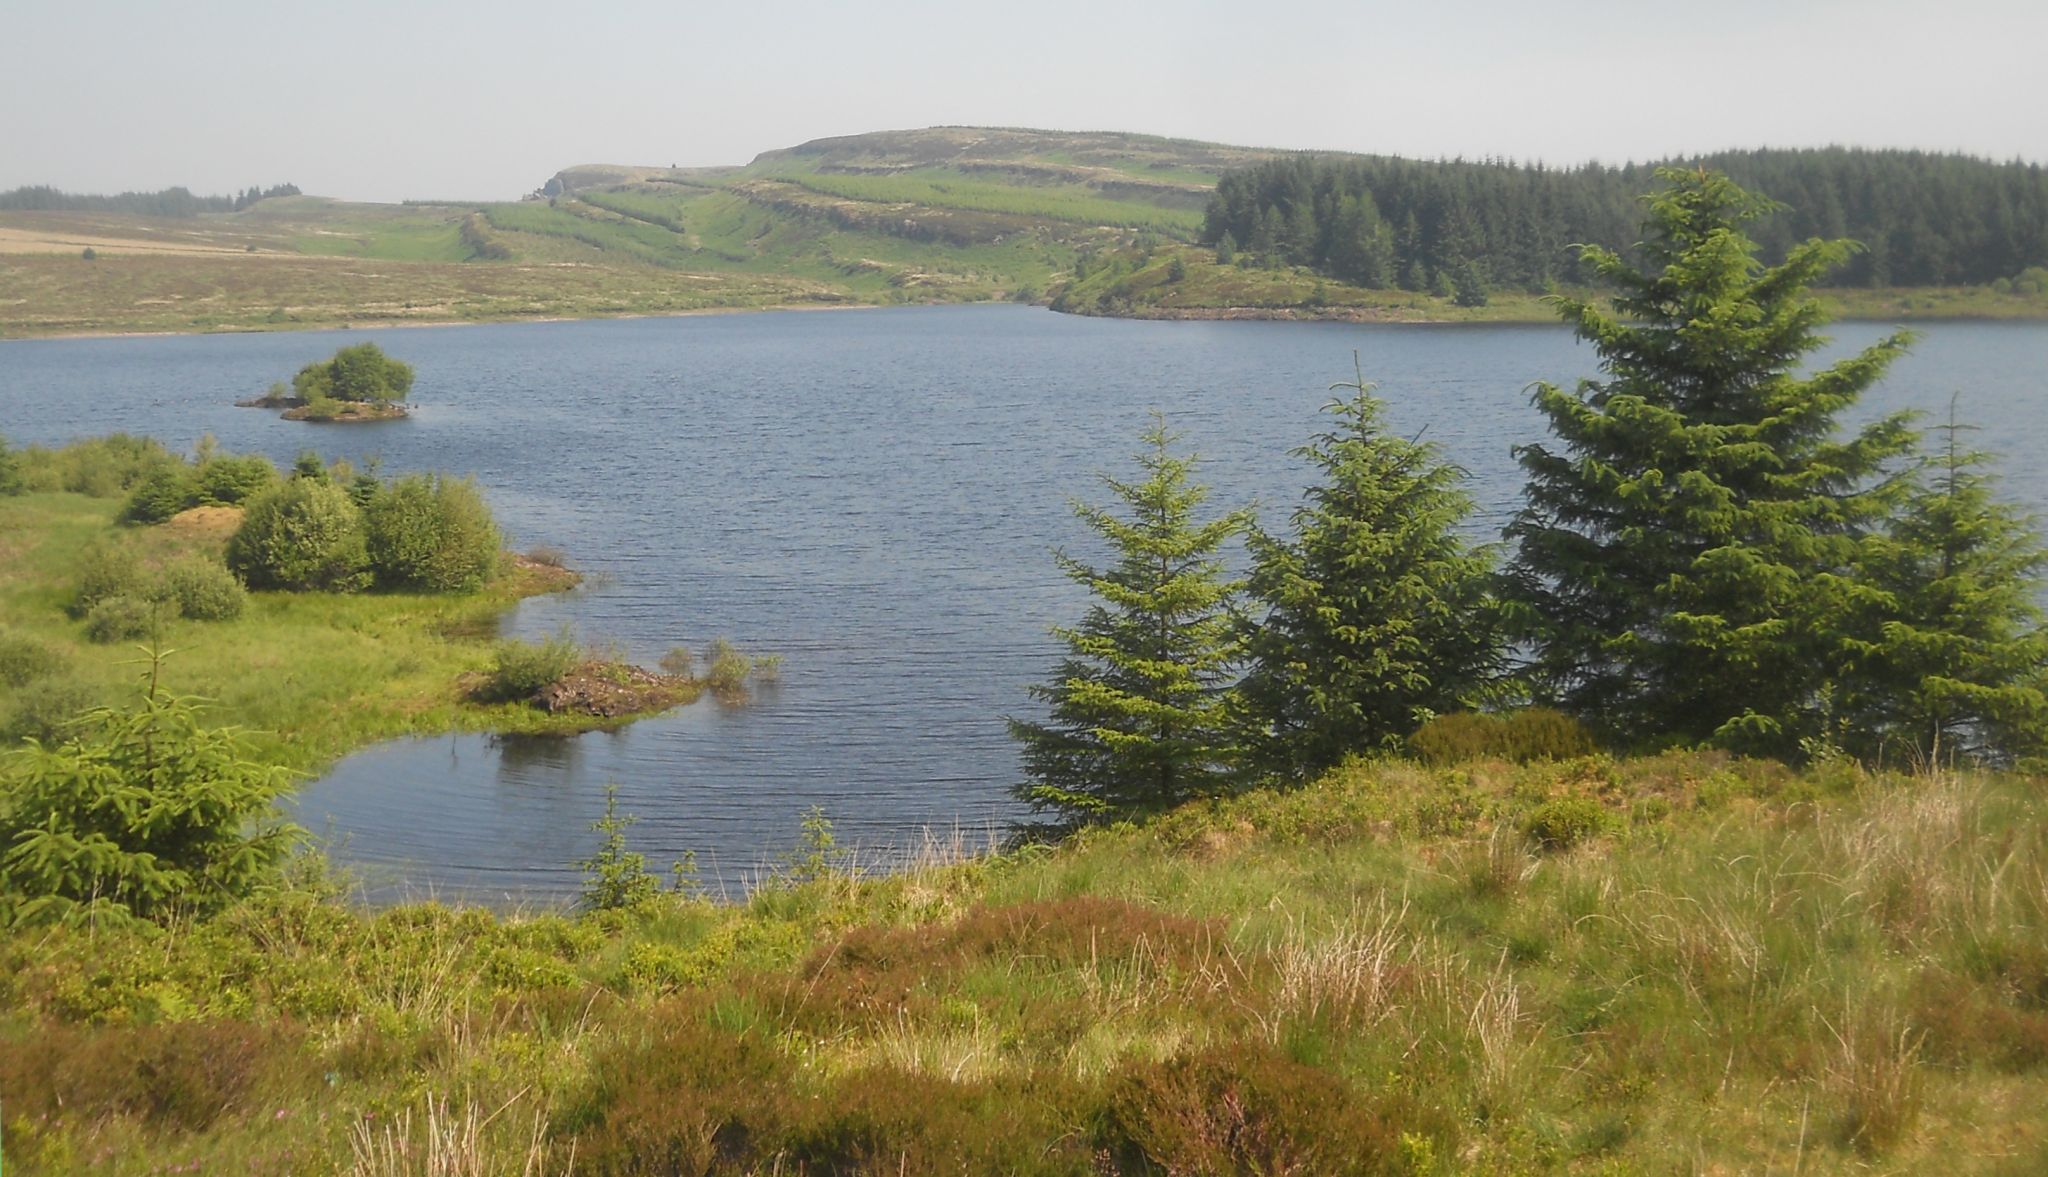 The Whangie and Auchineden Hill from Burncrooks Reservoir